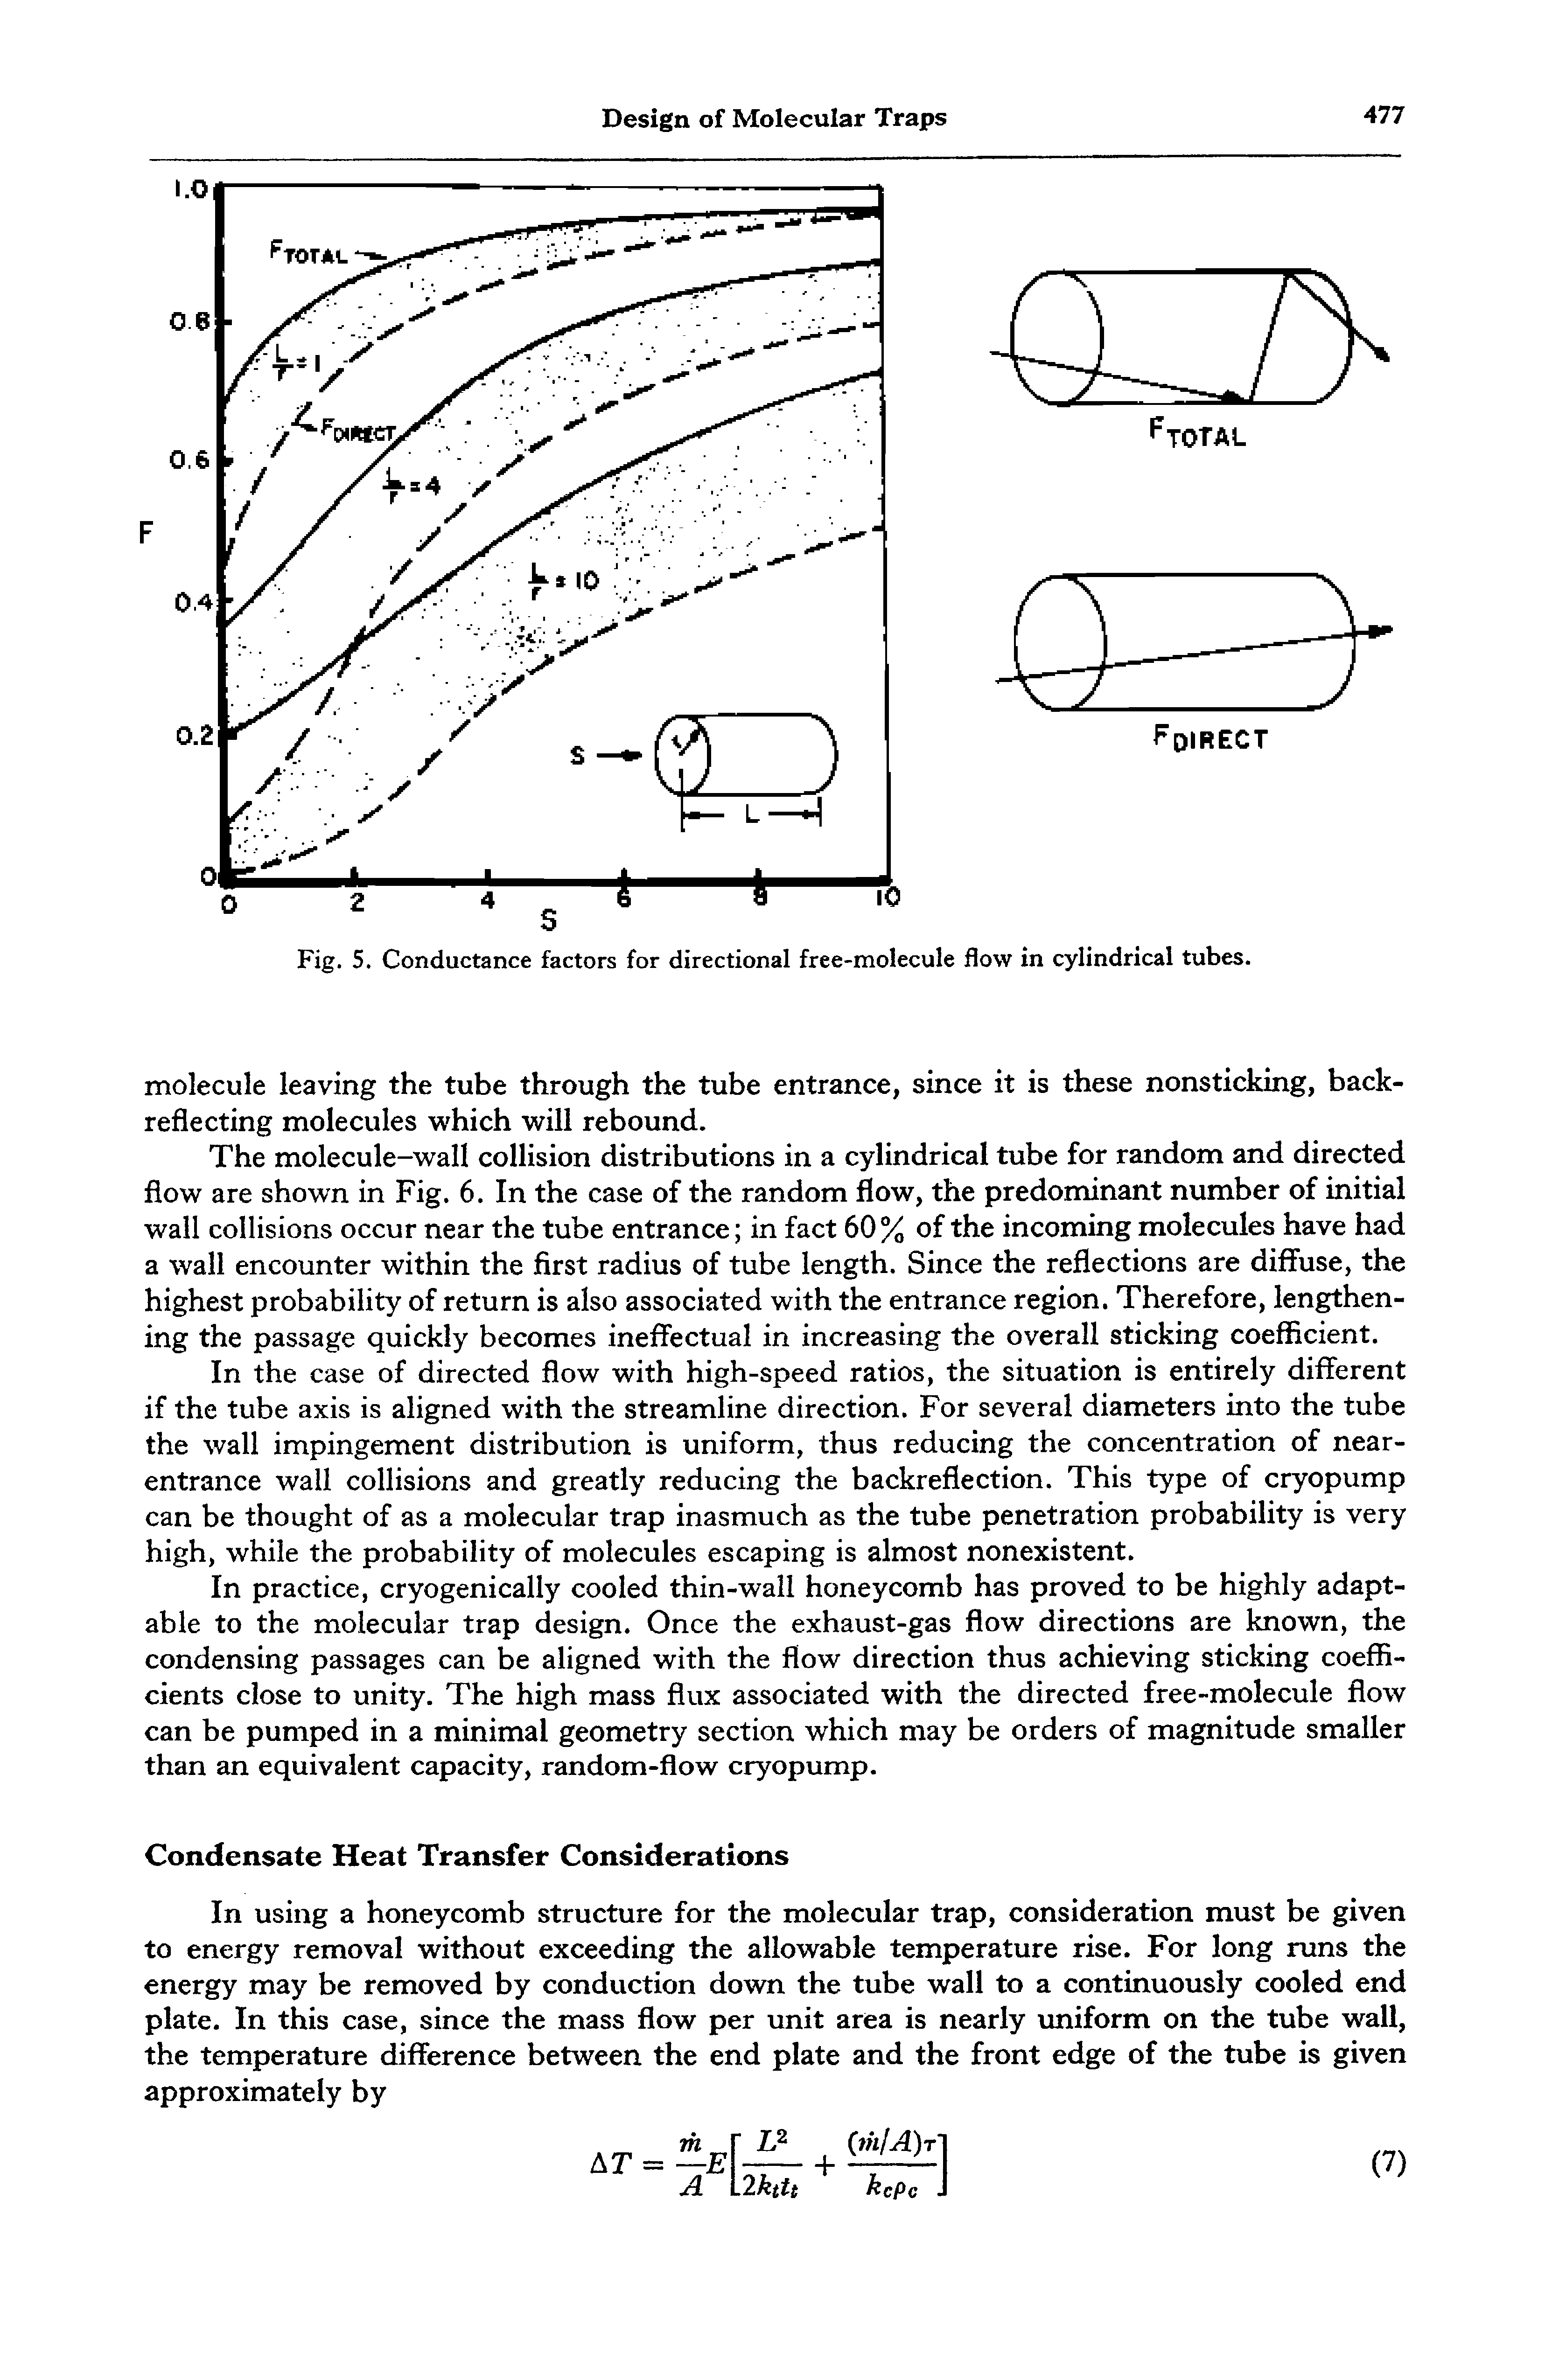 Fig. 5. Conductance factors for directional free-molecule flow in cylindrical tubes.